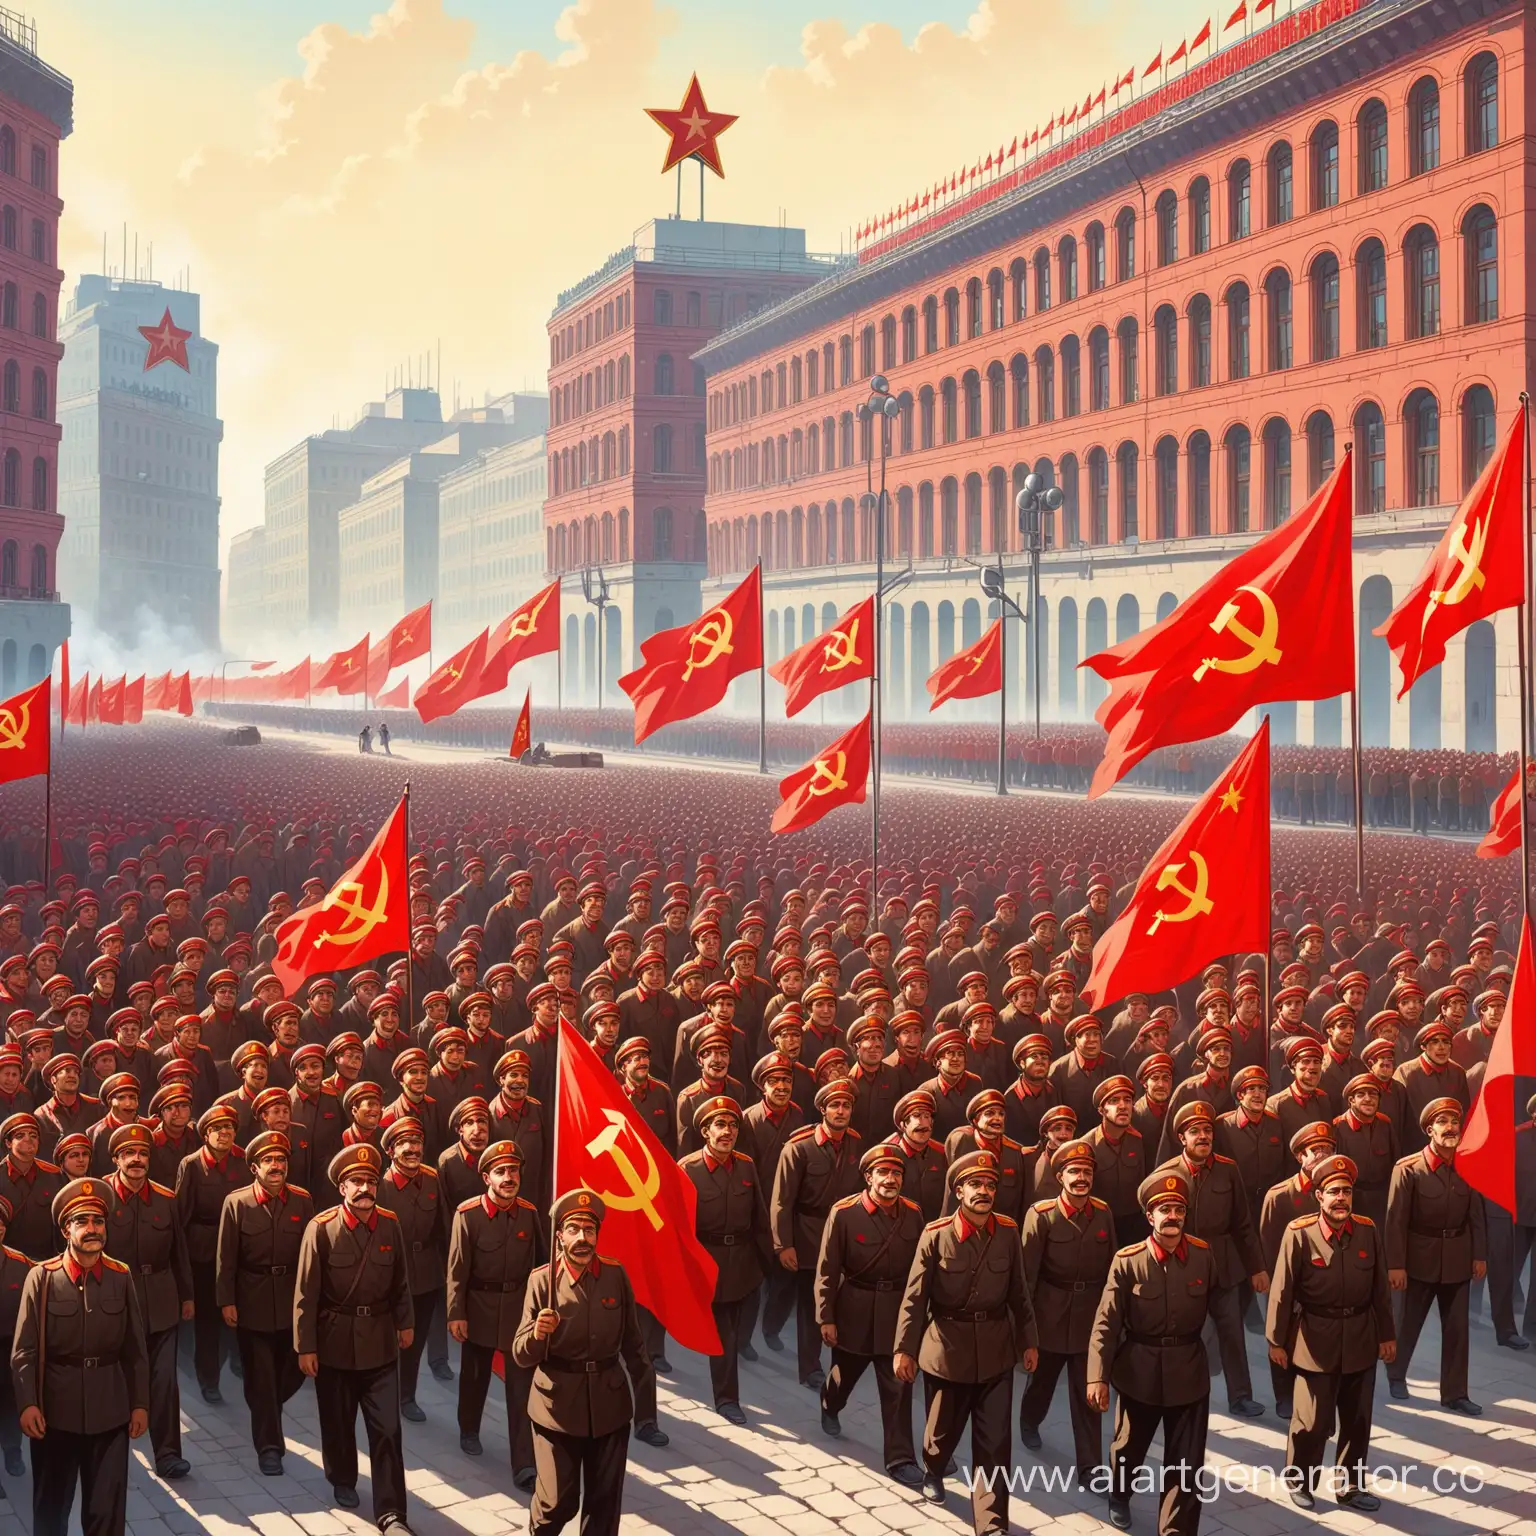 Workers-State-Demonstration-Symbolic-Communism-with-Hammer-and-Sickle